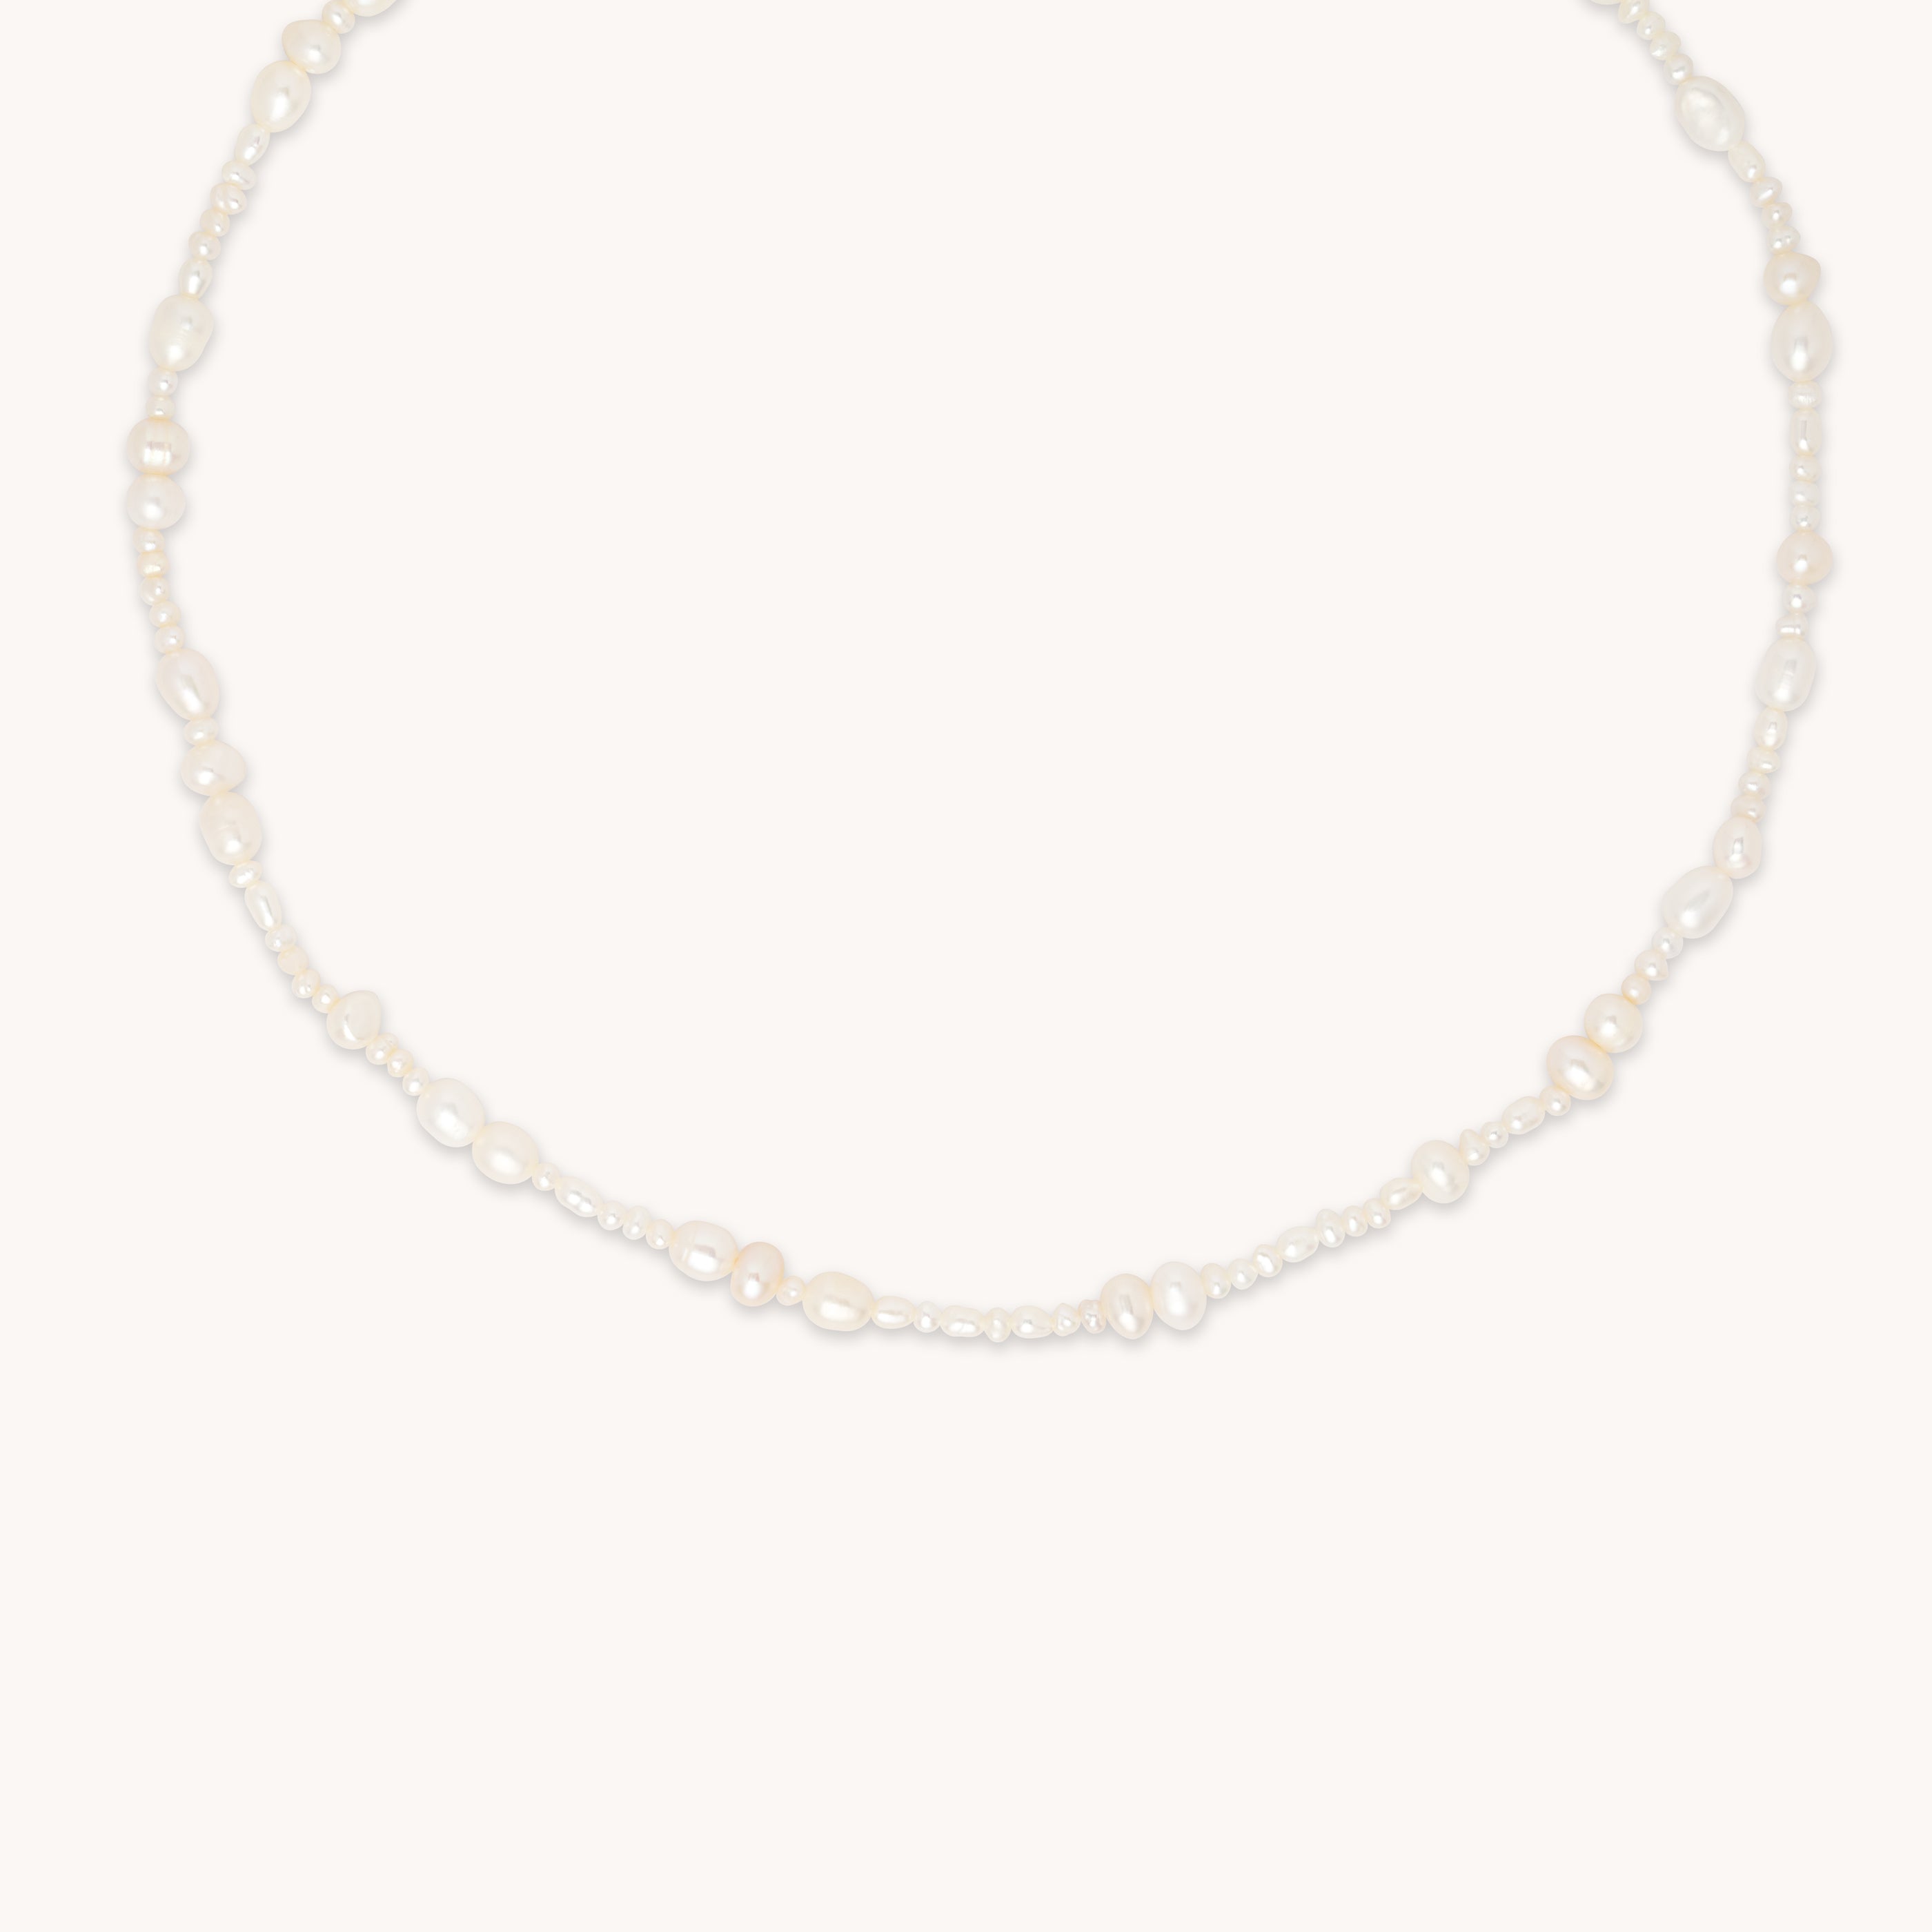 Serenity Pearl Beaded Necklace in Silver